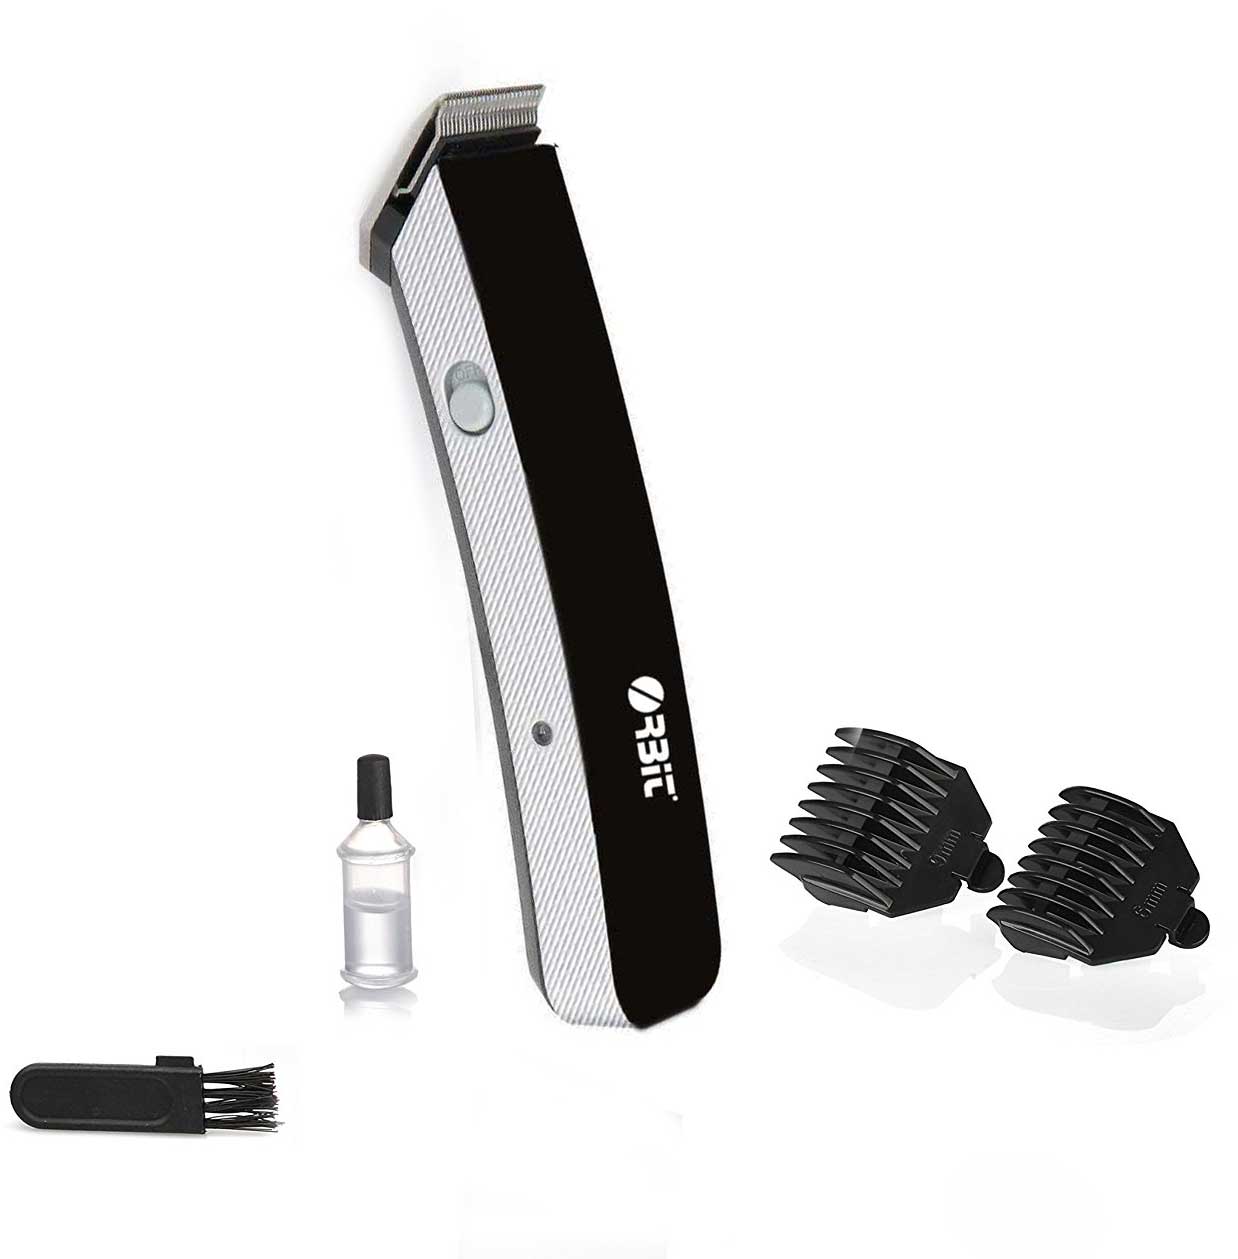 Orbit SN-102 Cordless Hair Trimmer – Buy Kitchen Appliances Online at Lowest  Prices in India